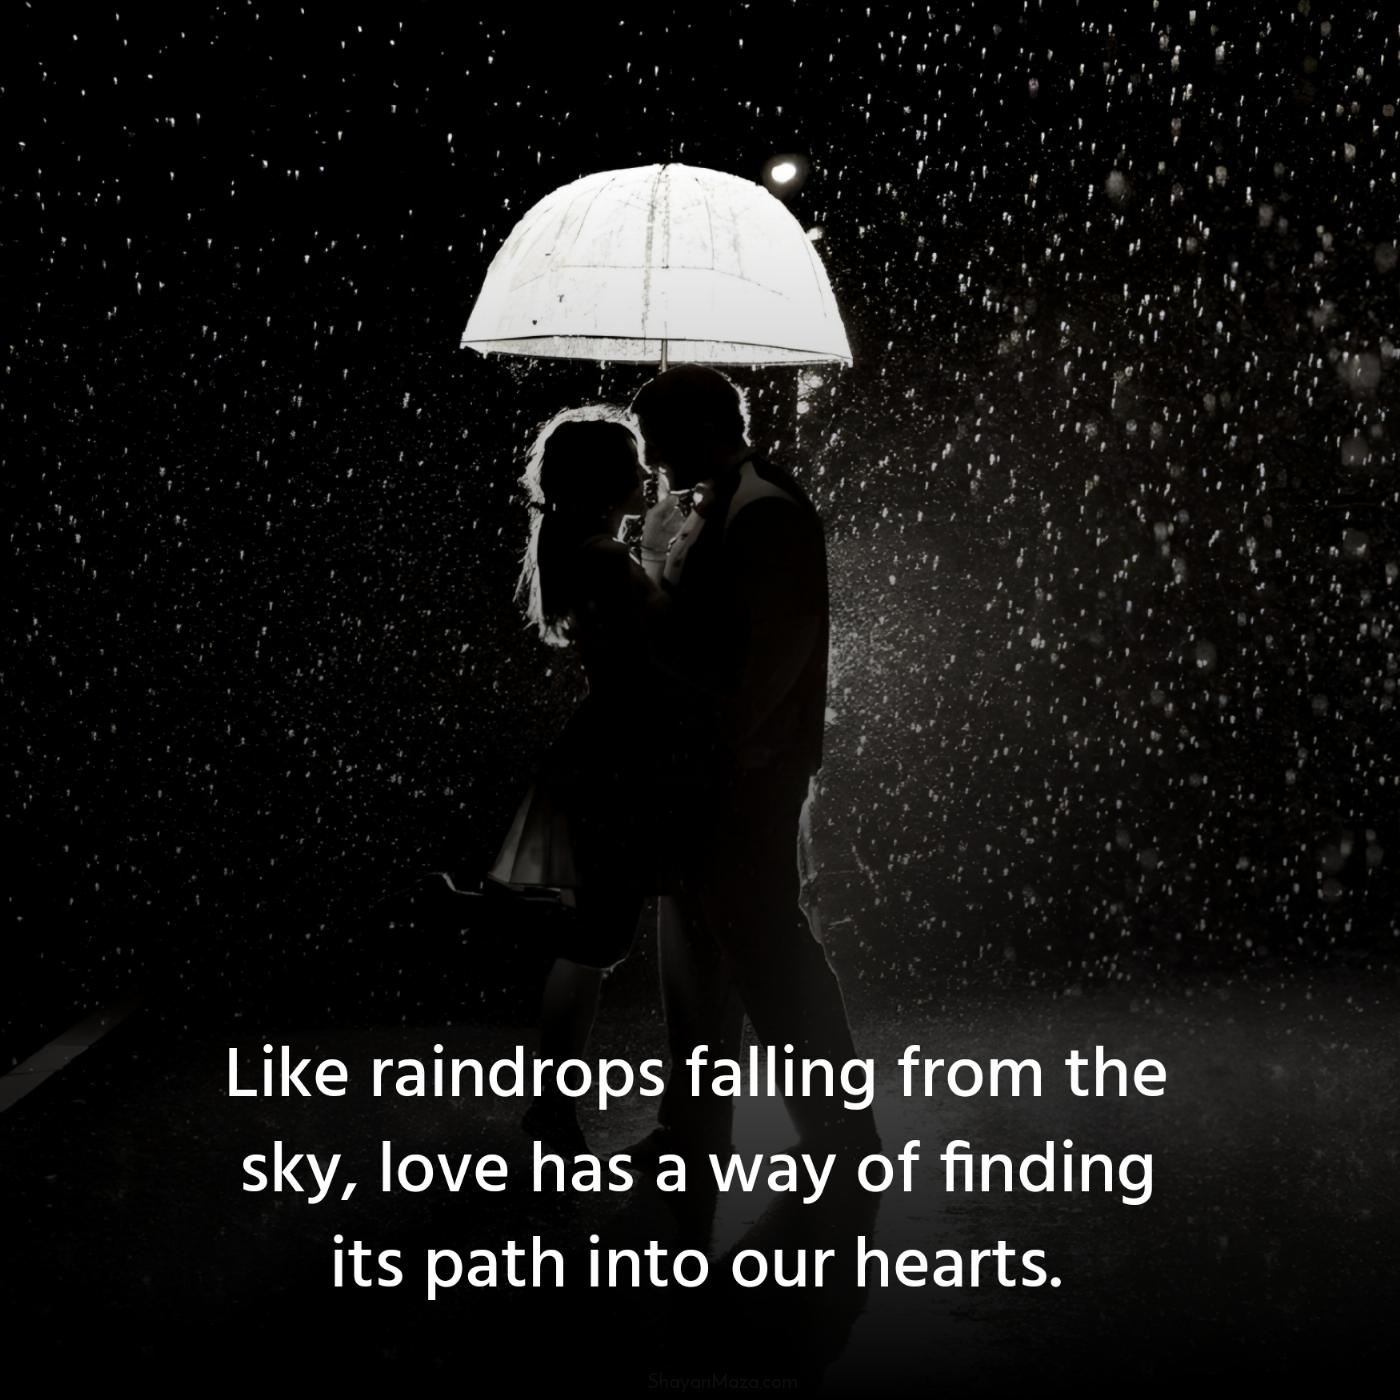 Like raindrops falling from the sky love has a way of finding its path